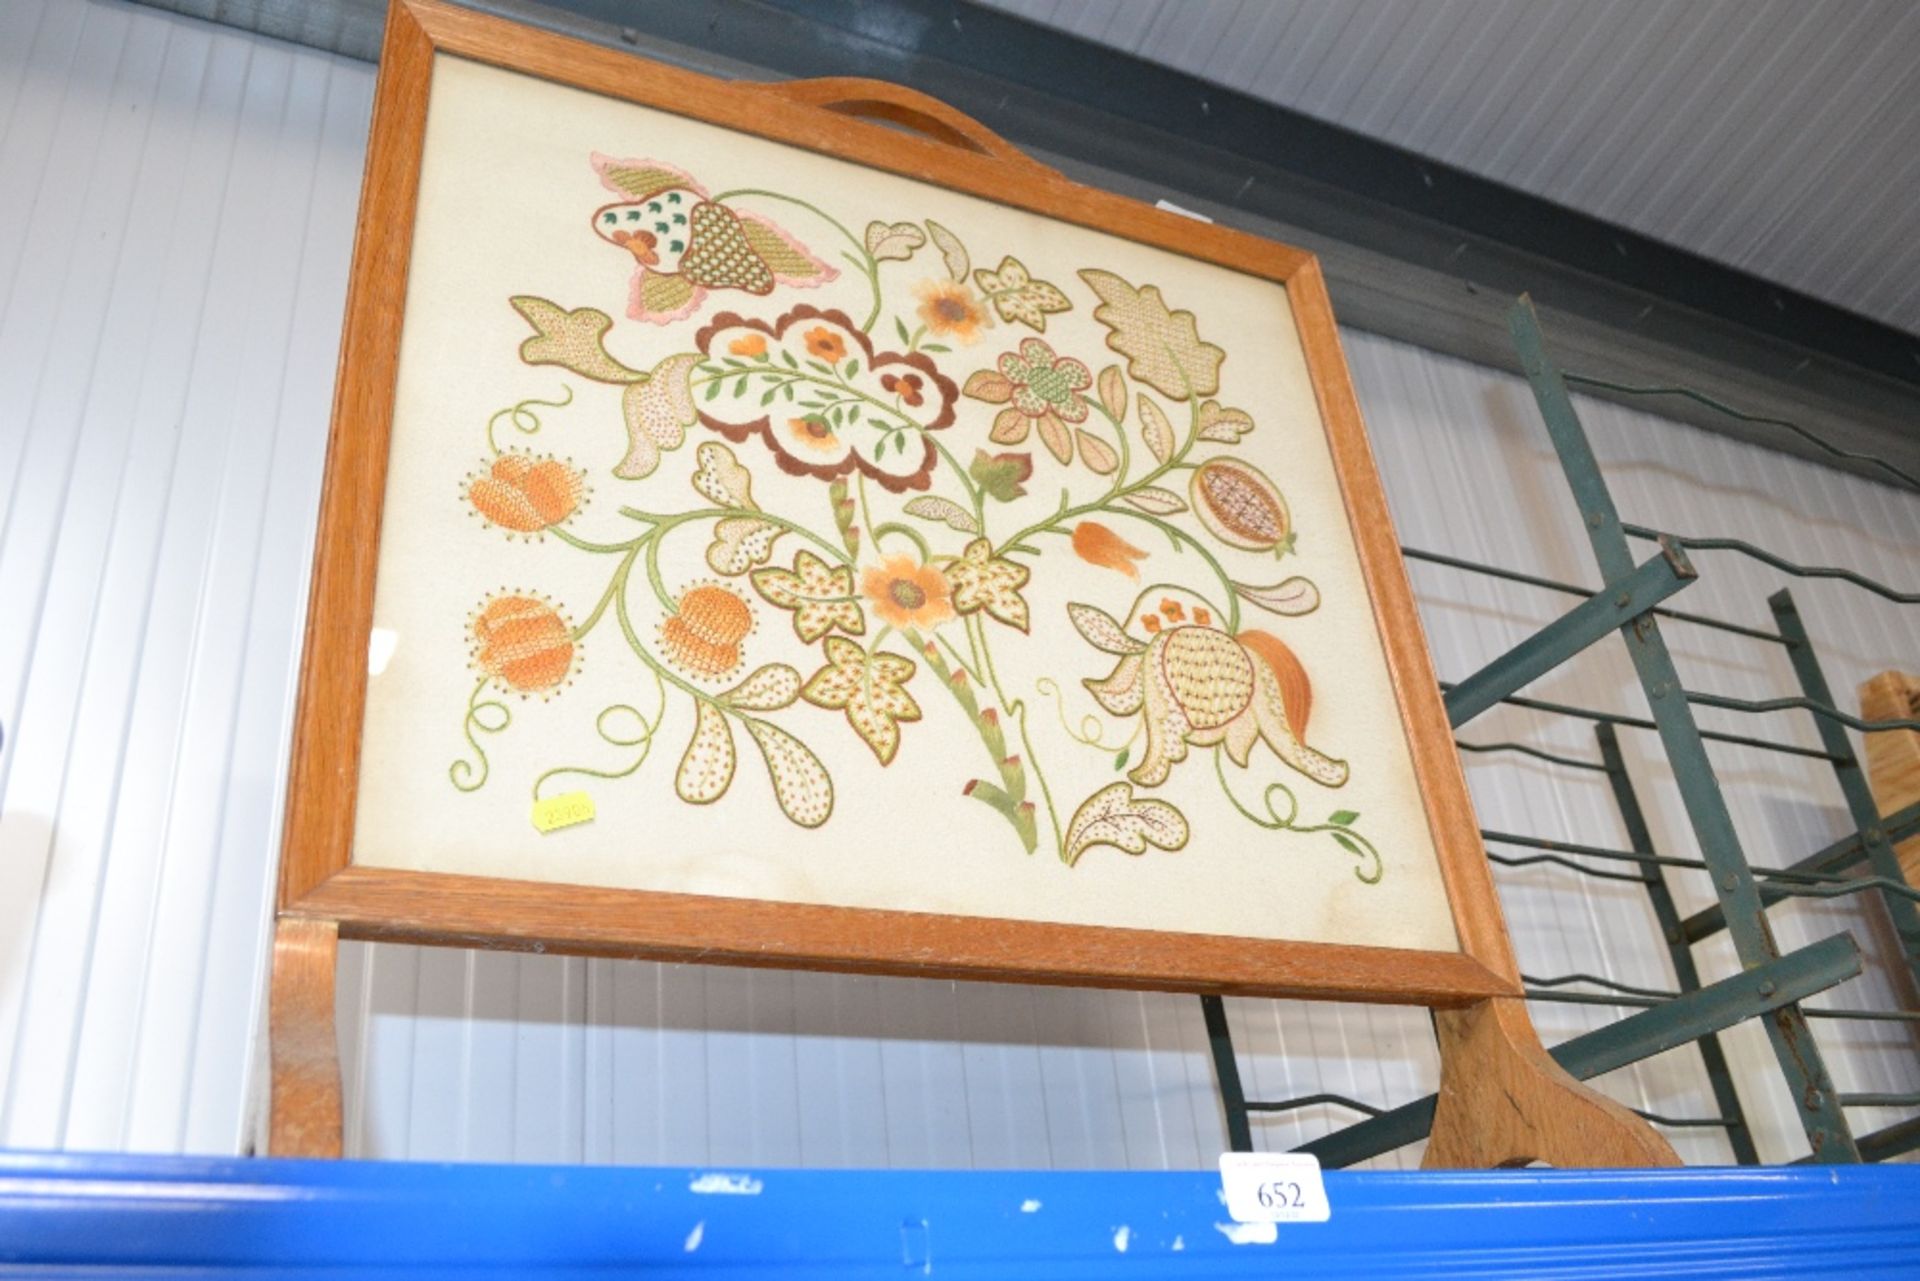 An embroidered fire screen